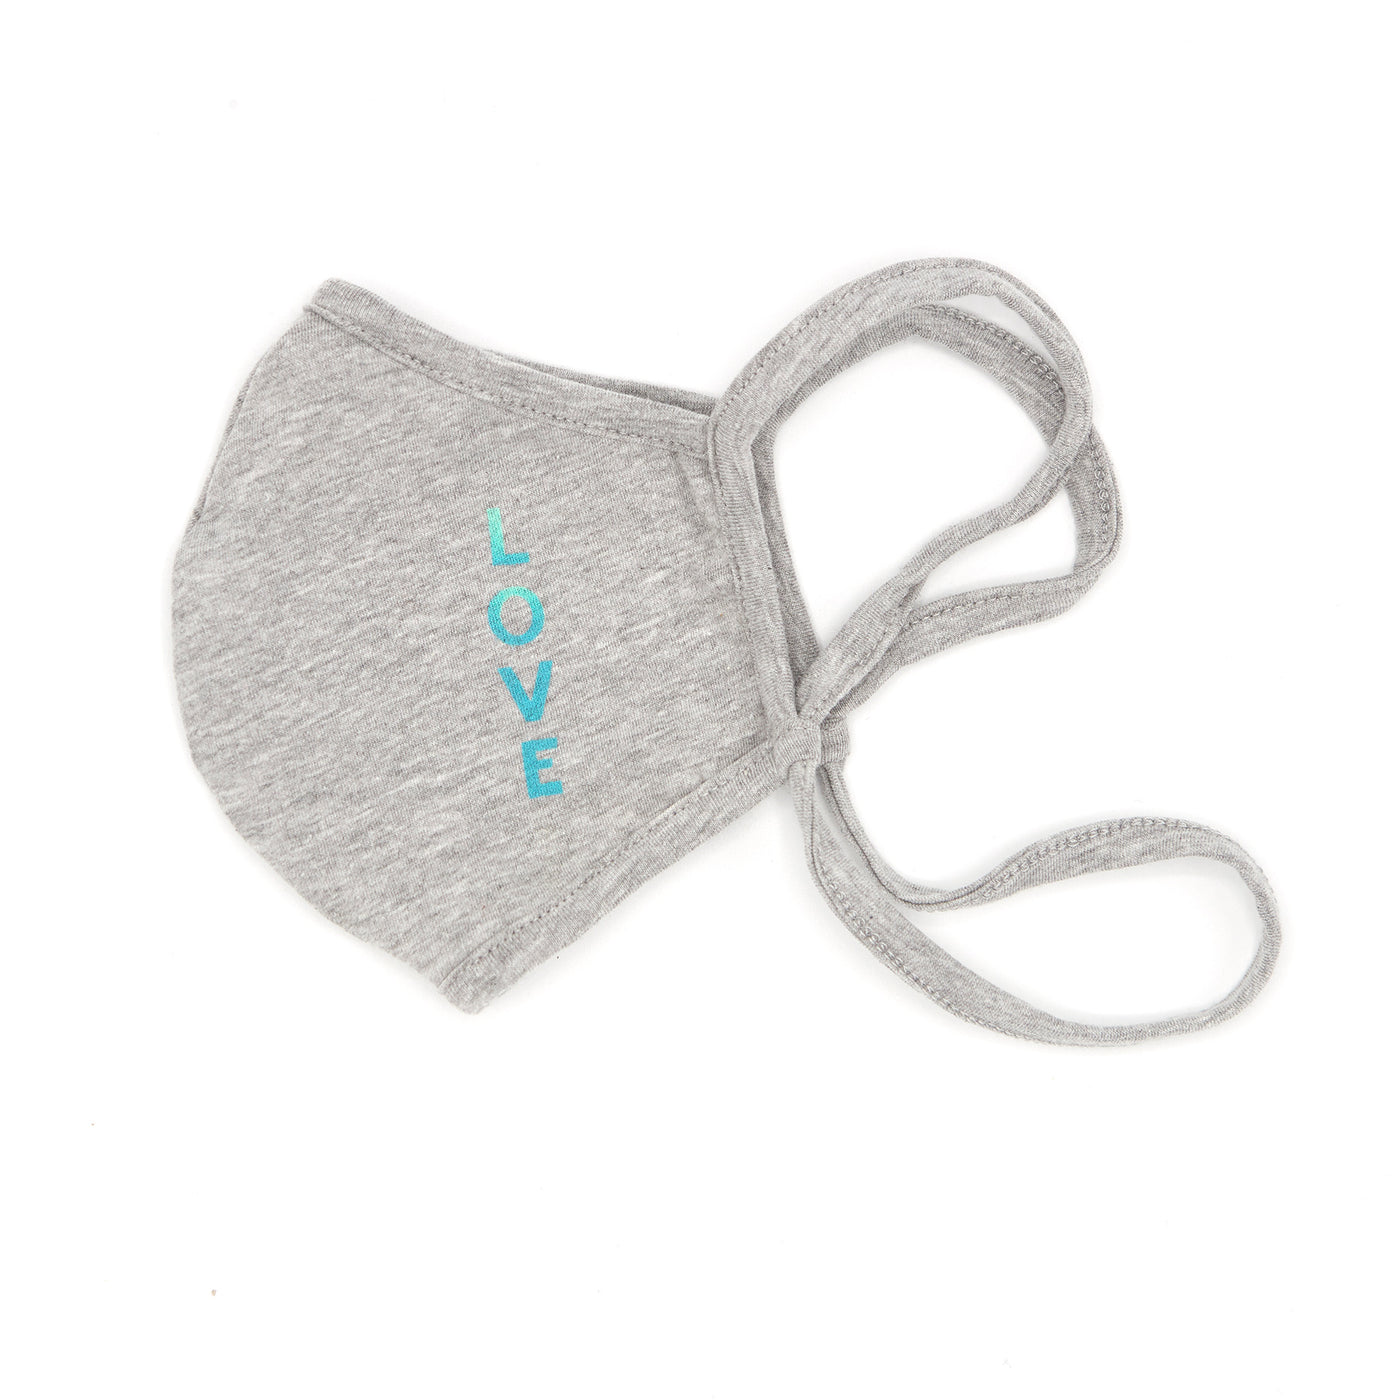 BAILEY BERRY LOVE Adult Face Mask with Adjustable Eternity Strap and Filter Pocket